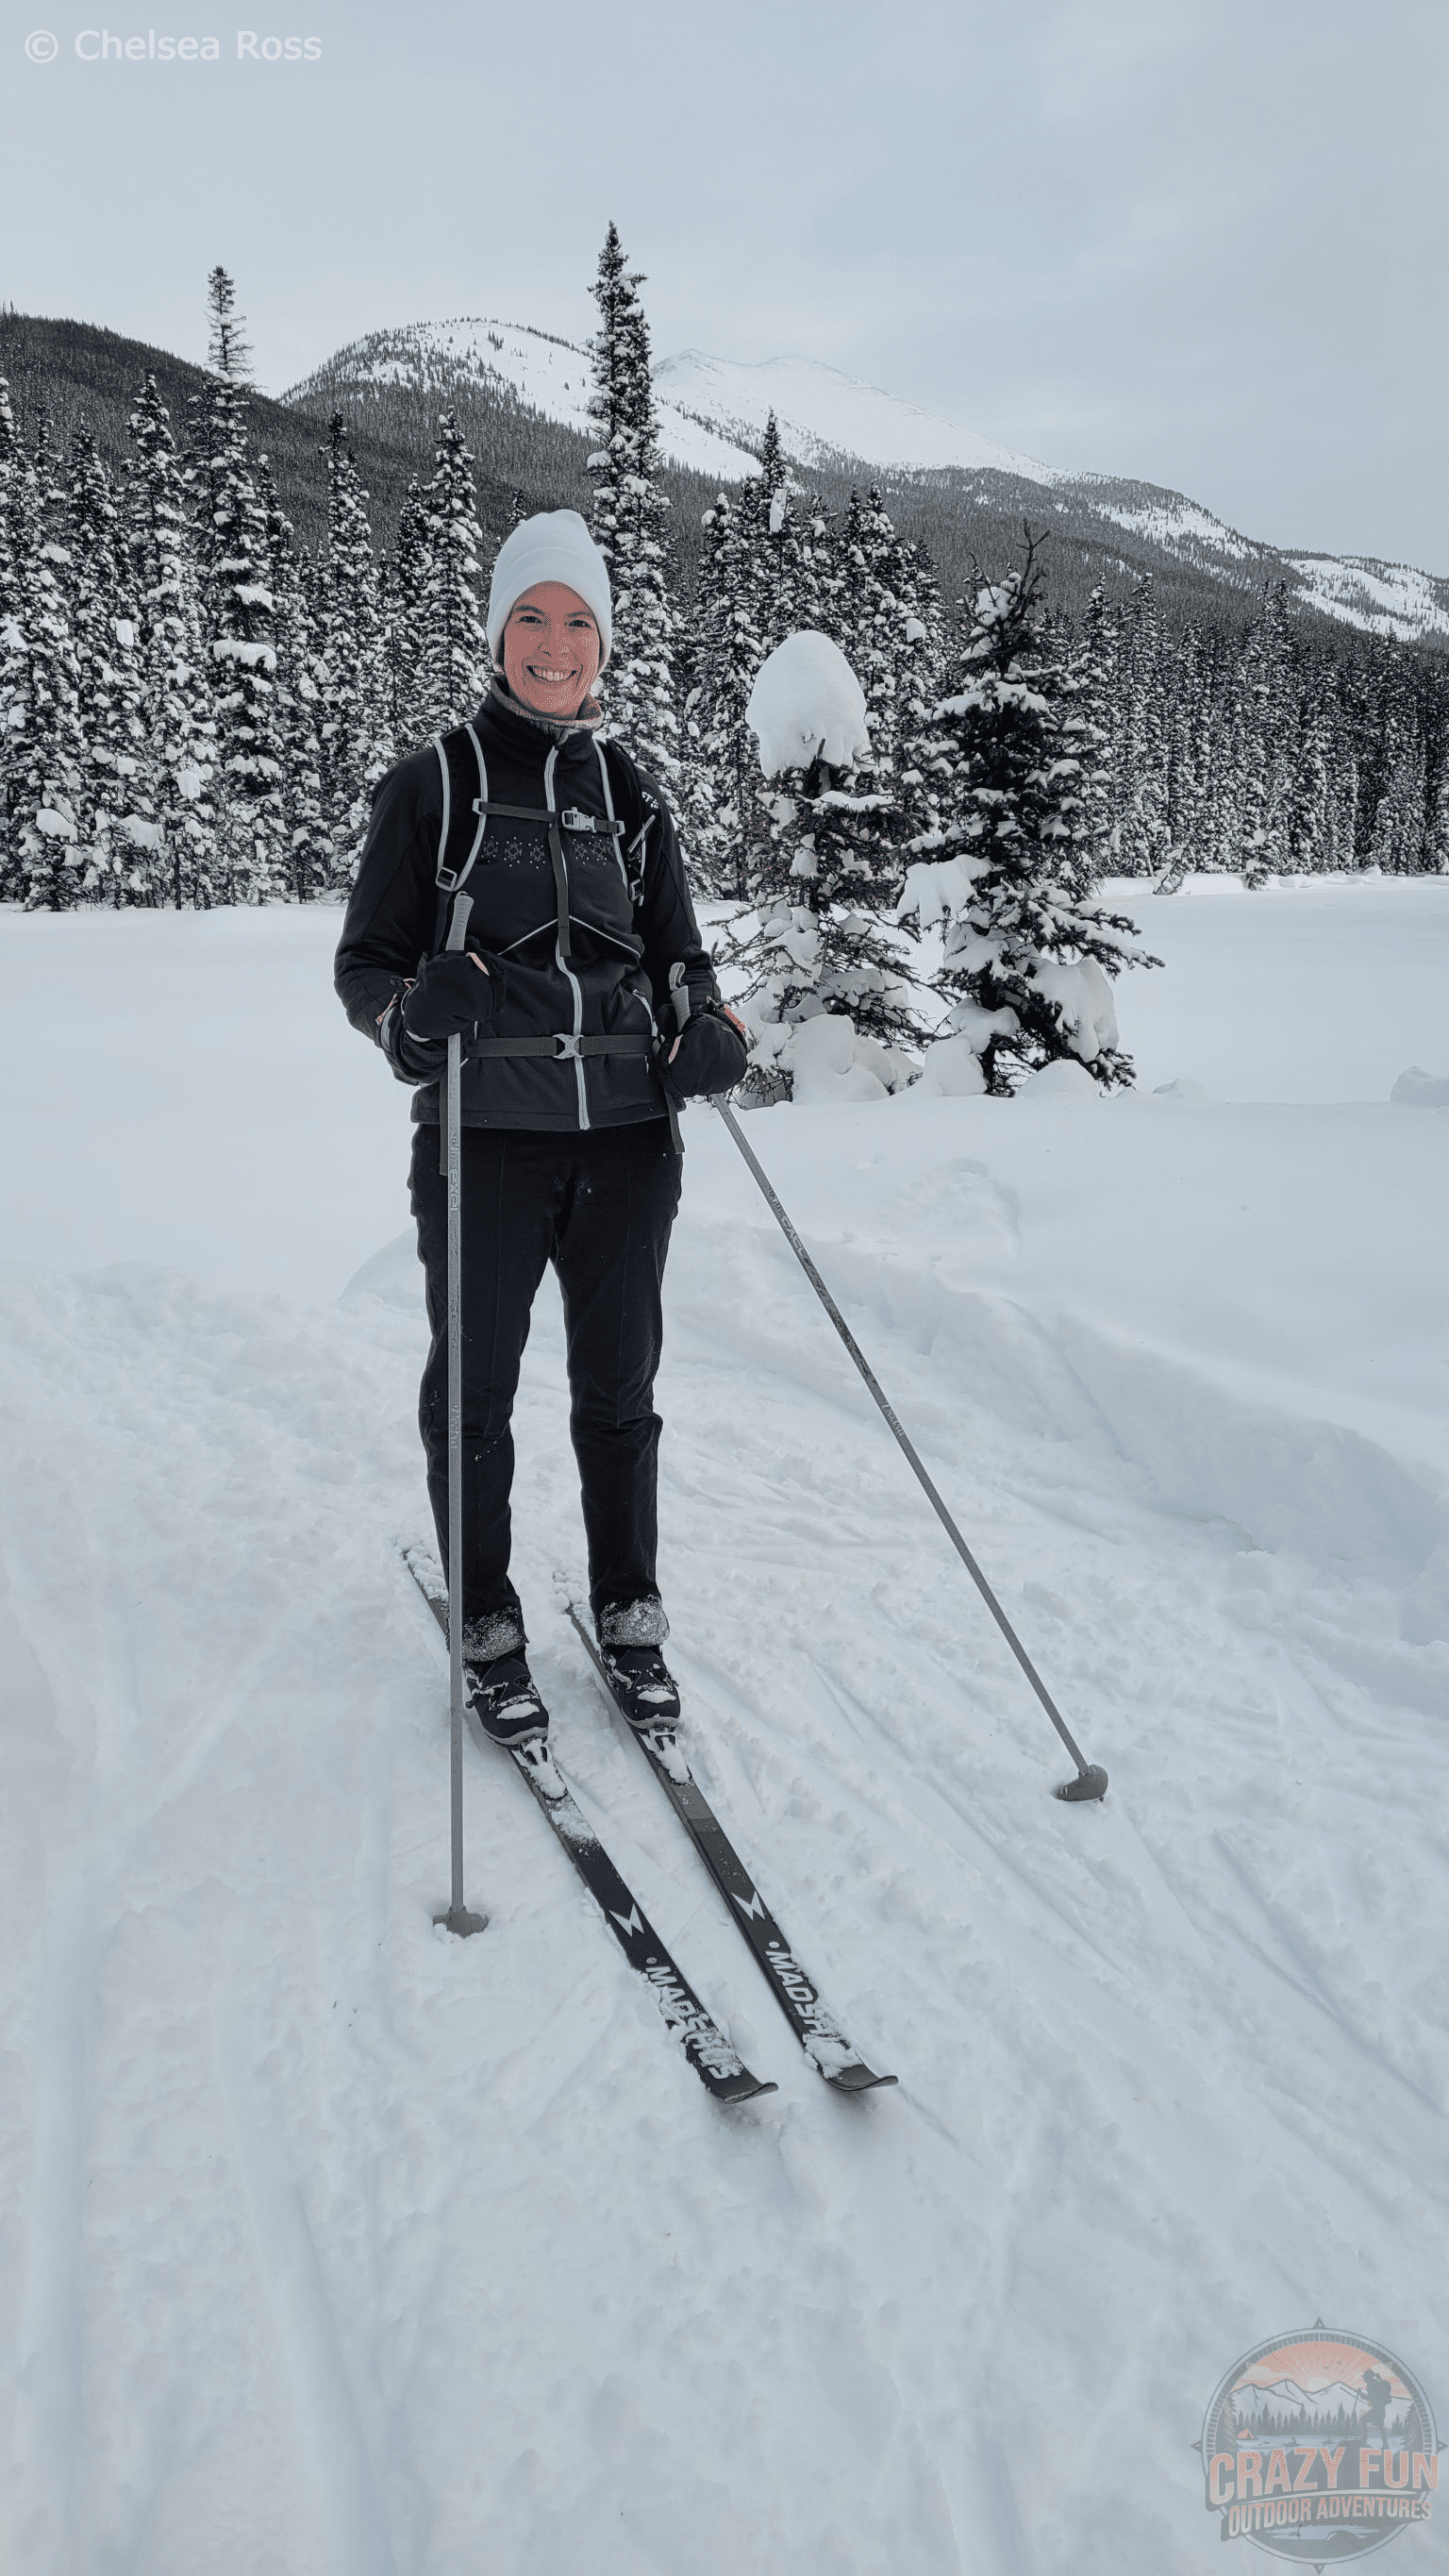 Focus on What Matters: cross-country skiing as often as I can.